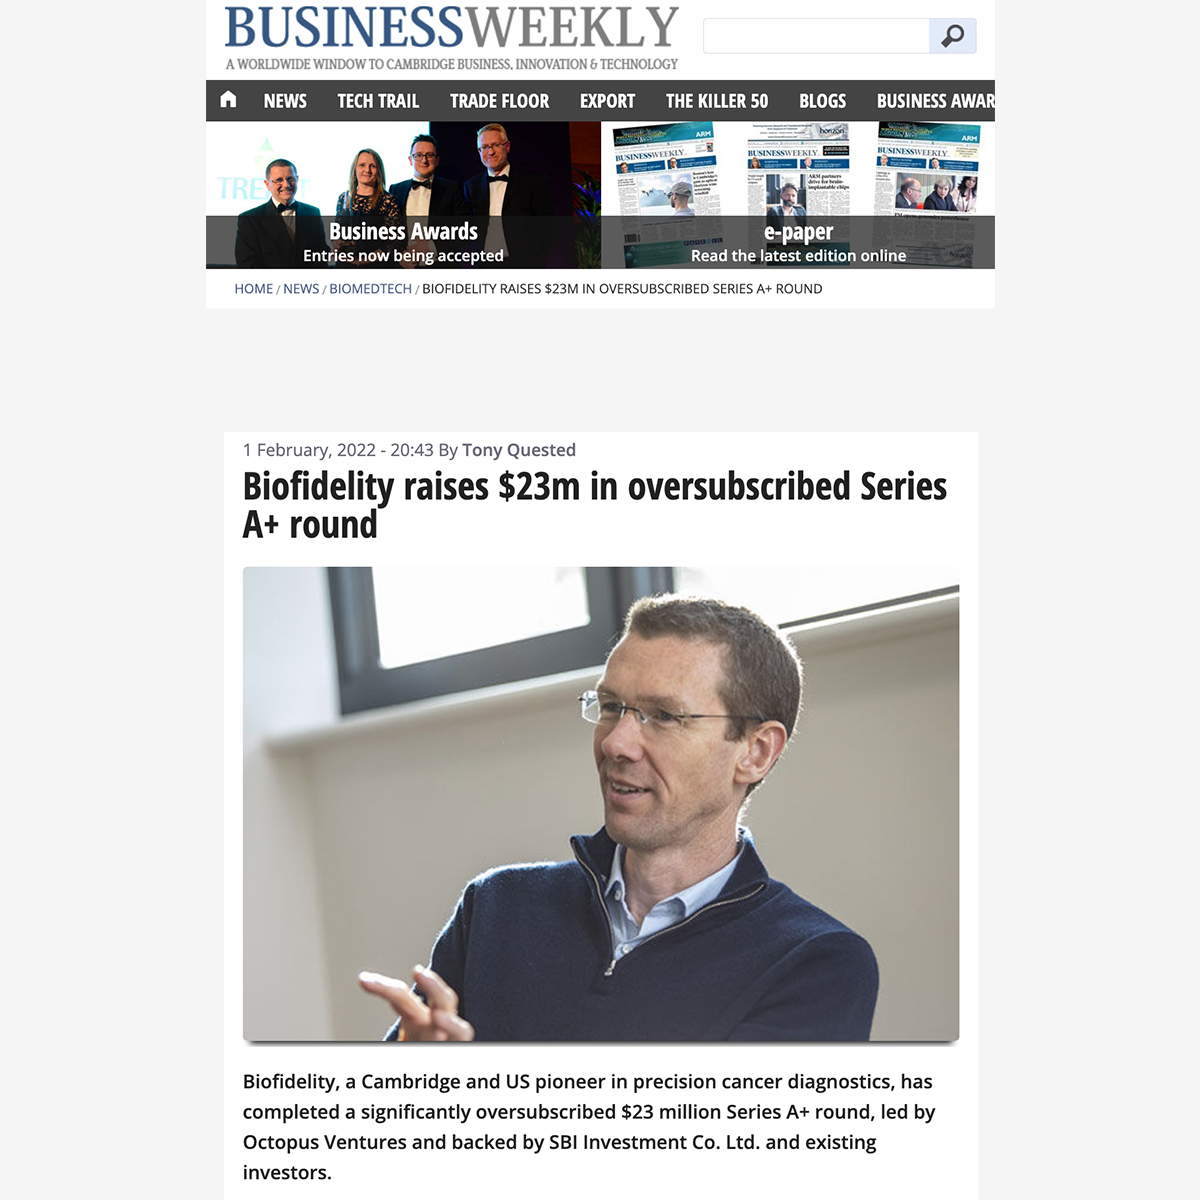 Biofidelity raises $23m in oversubscribed Series A+ round